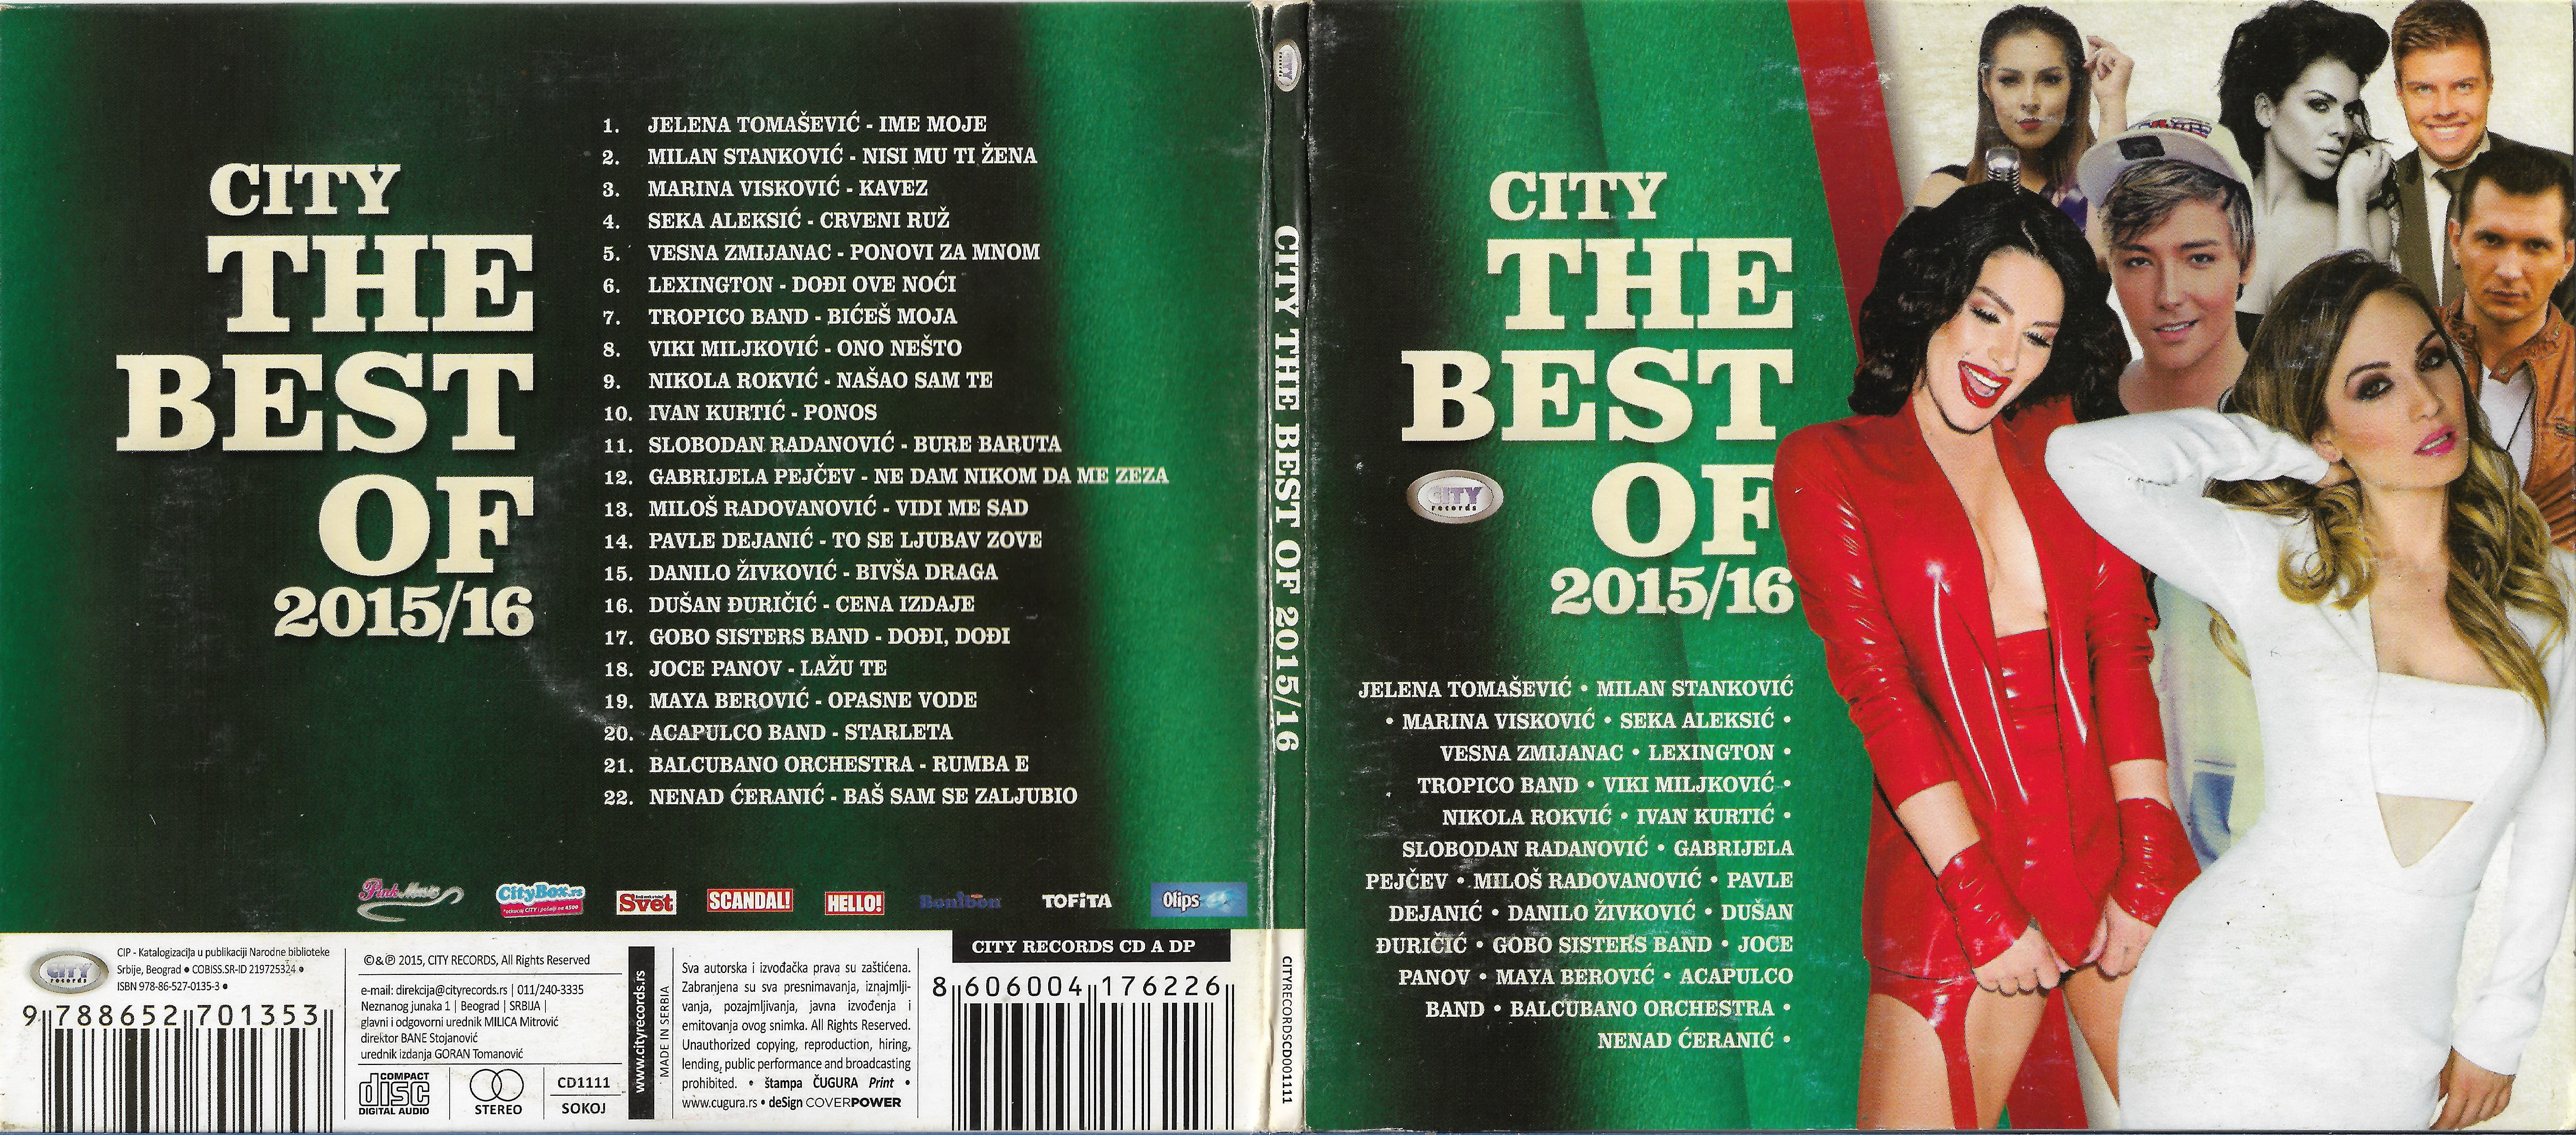 City The Best Of 201516 1